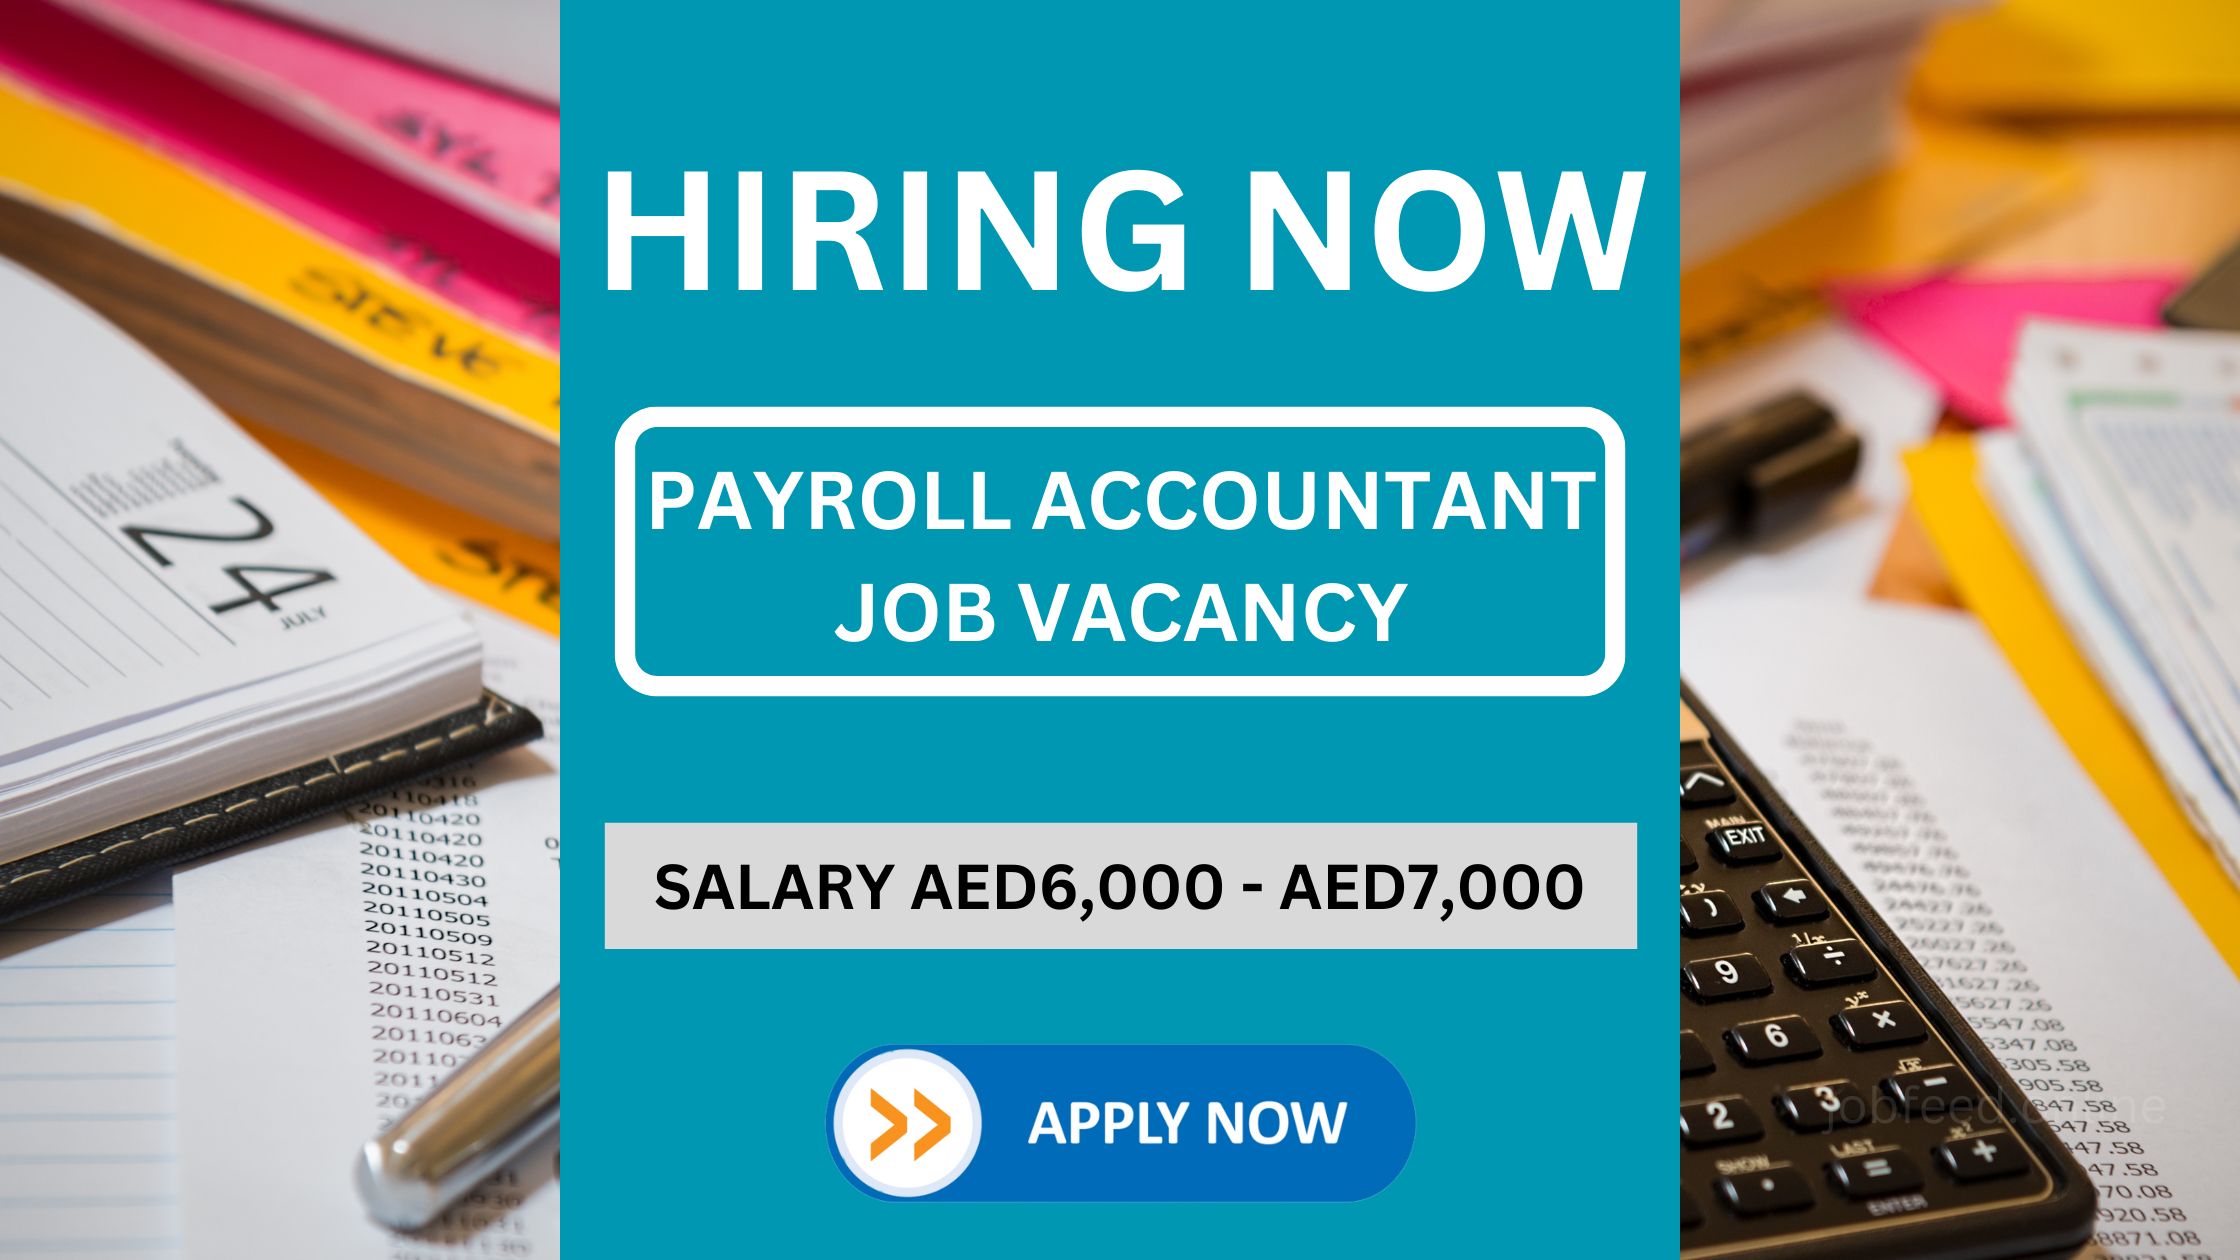 Payroll Accountant Job Vacancy - Monthly Salary 6,000 AED – 7,000 AED